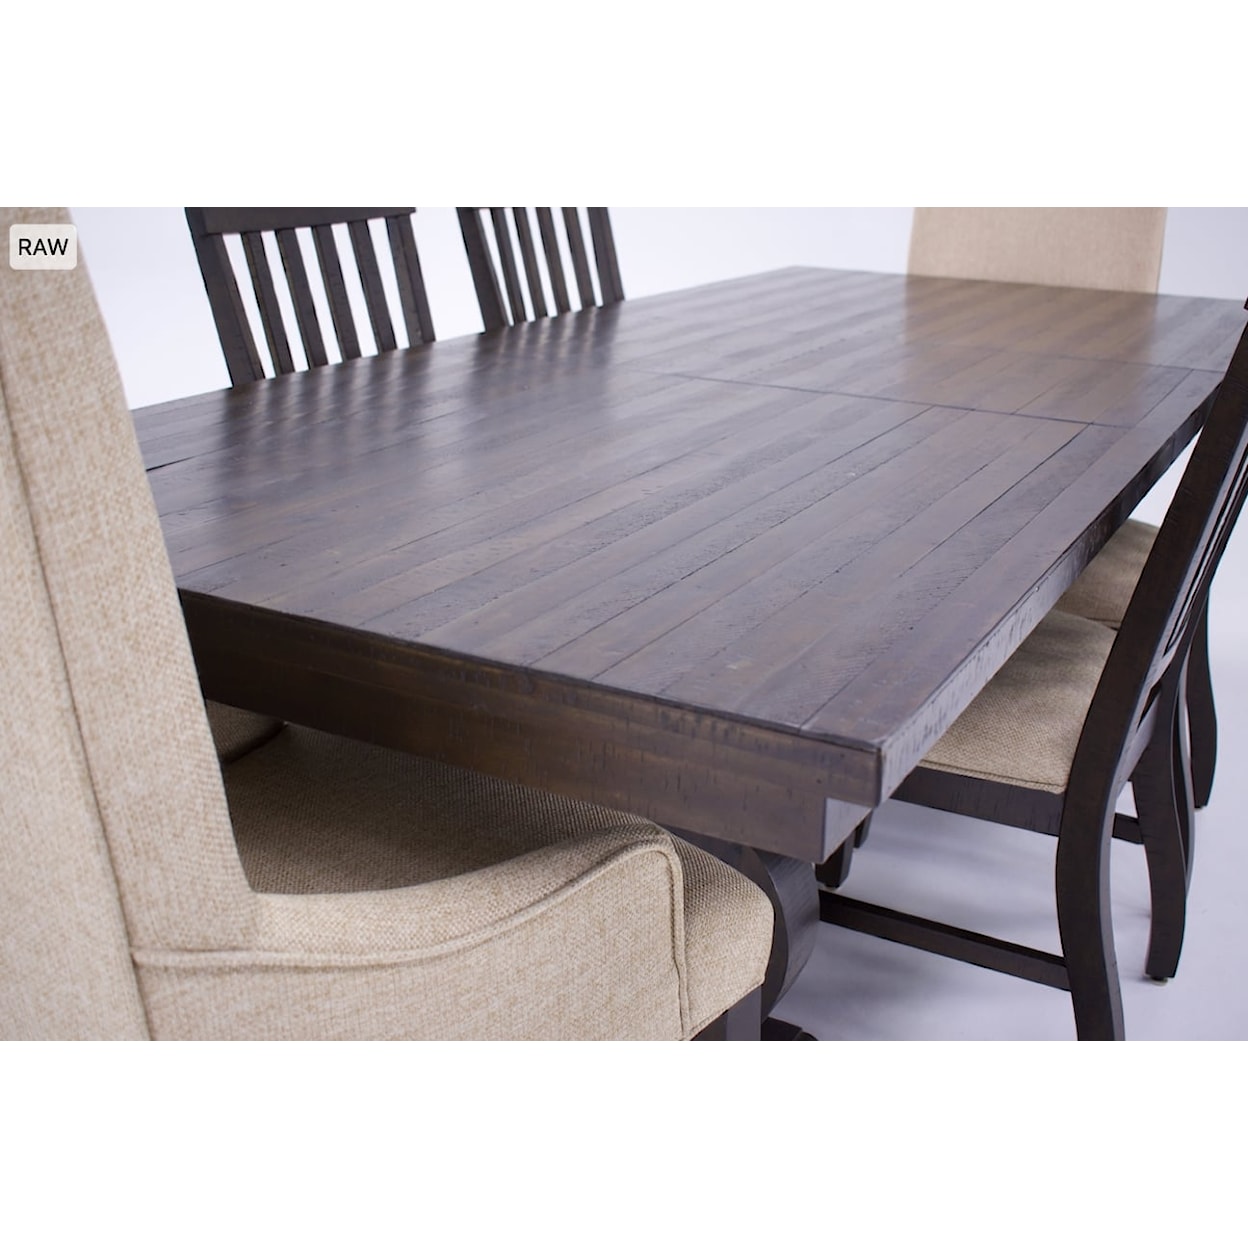 JB Home Mabell Mabel Dining Table, 4 Chairs & 2 Host Chairs